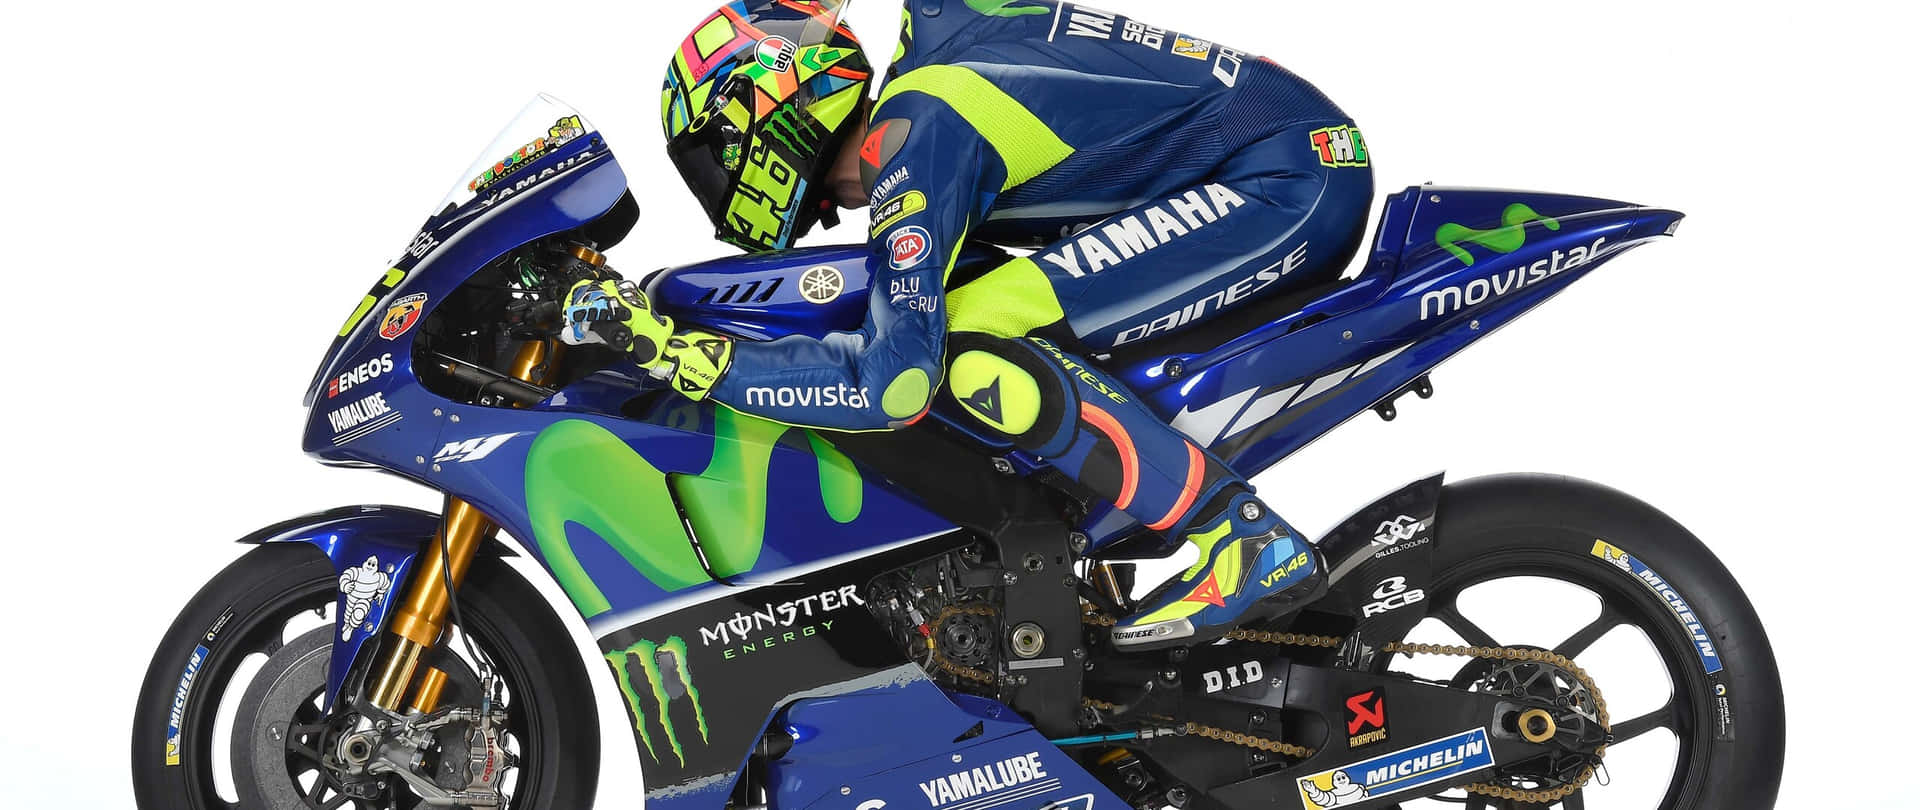 A Thrilling Ride With The Vr46 Yamaha Monster Energy Motorcycle Background